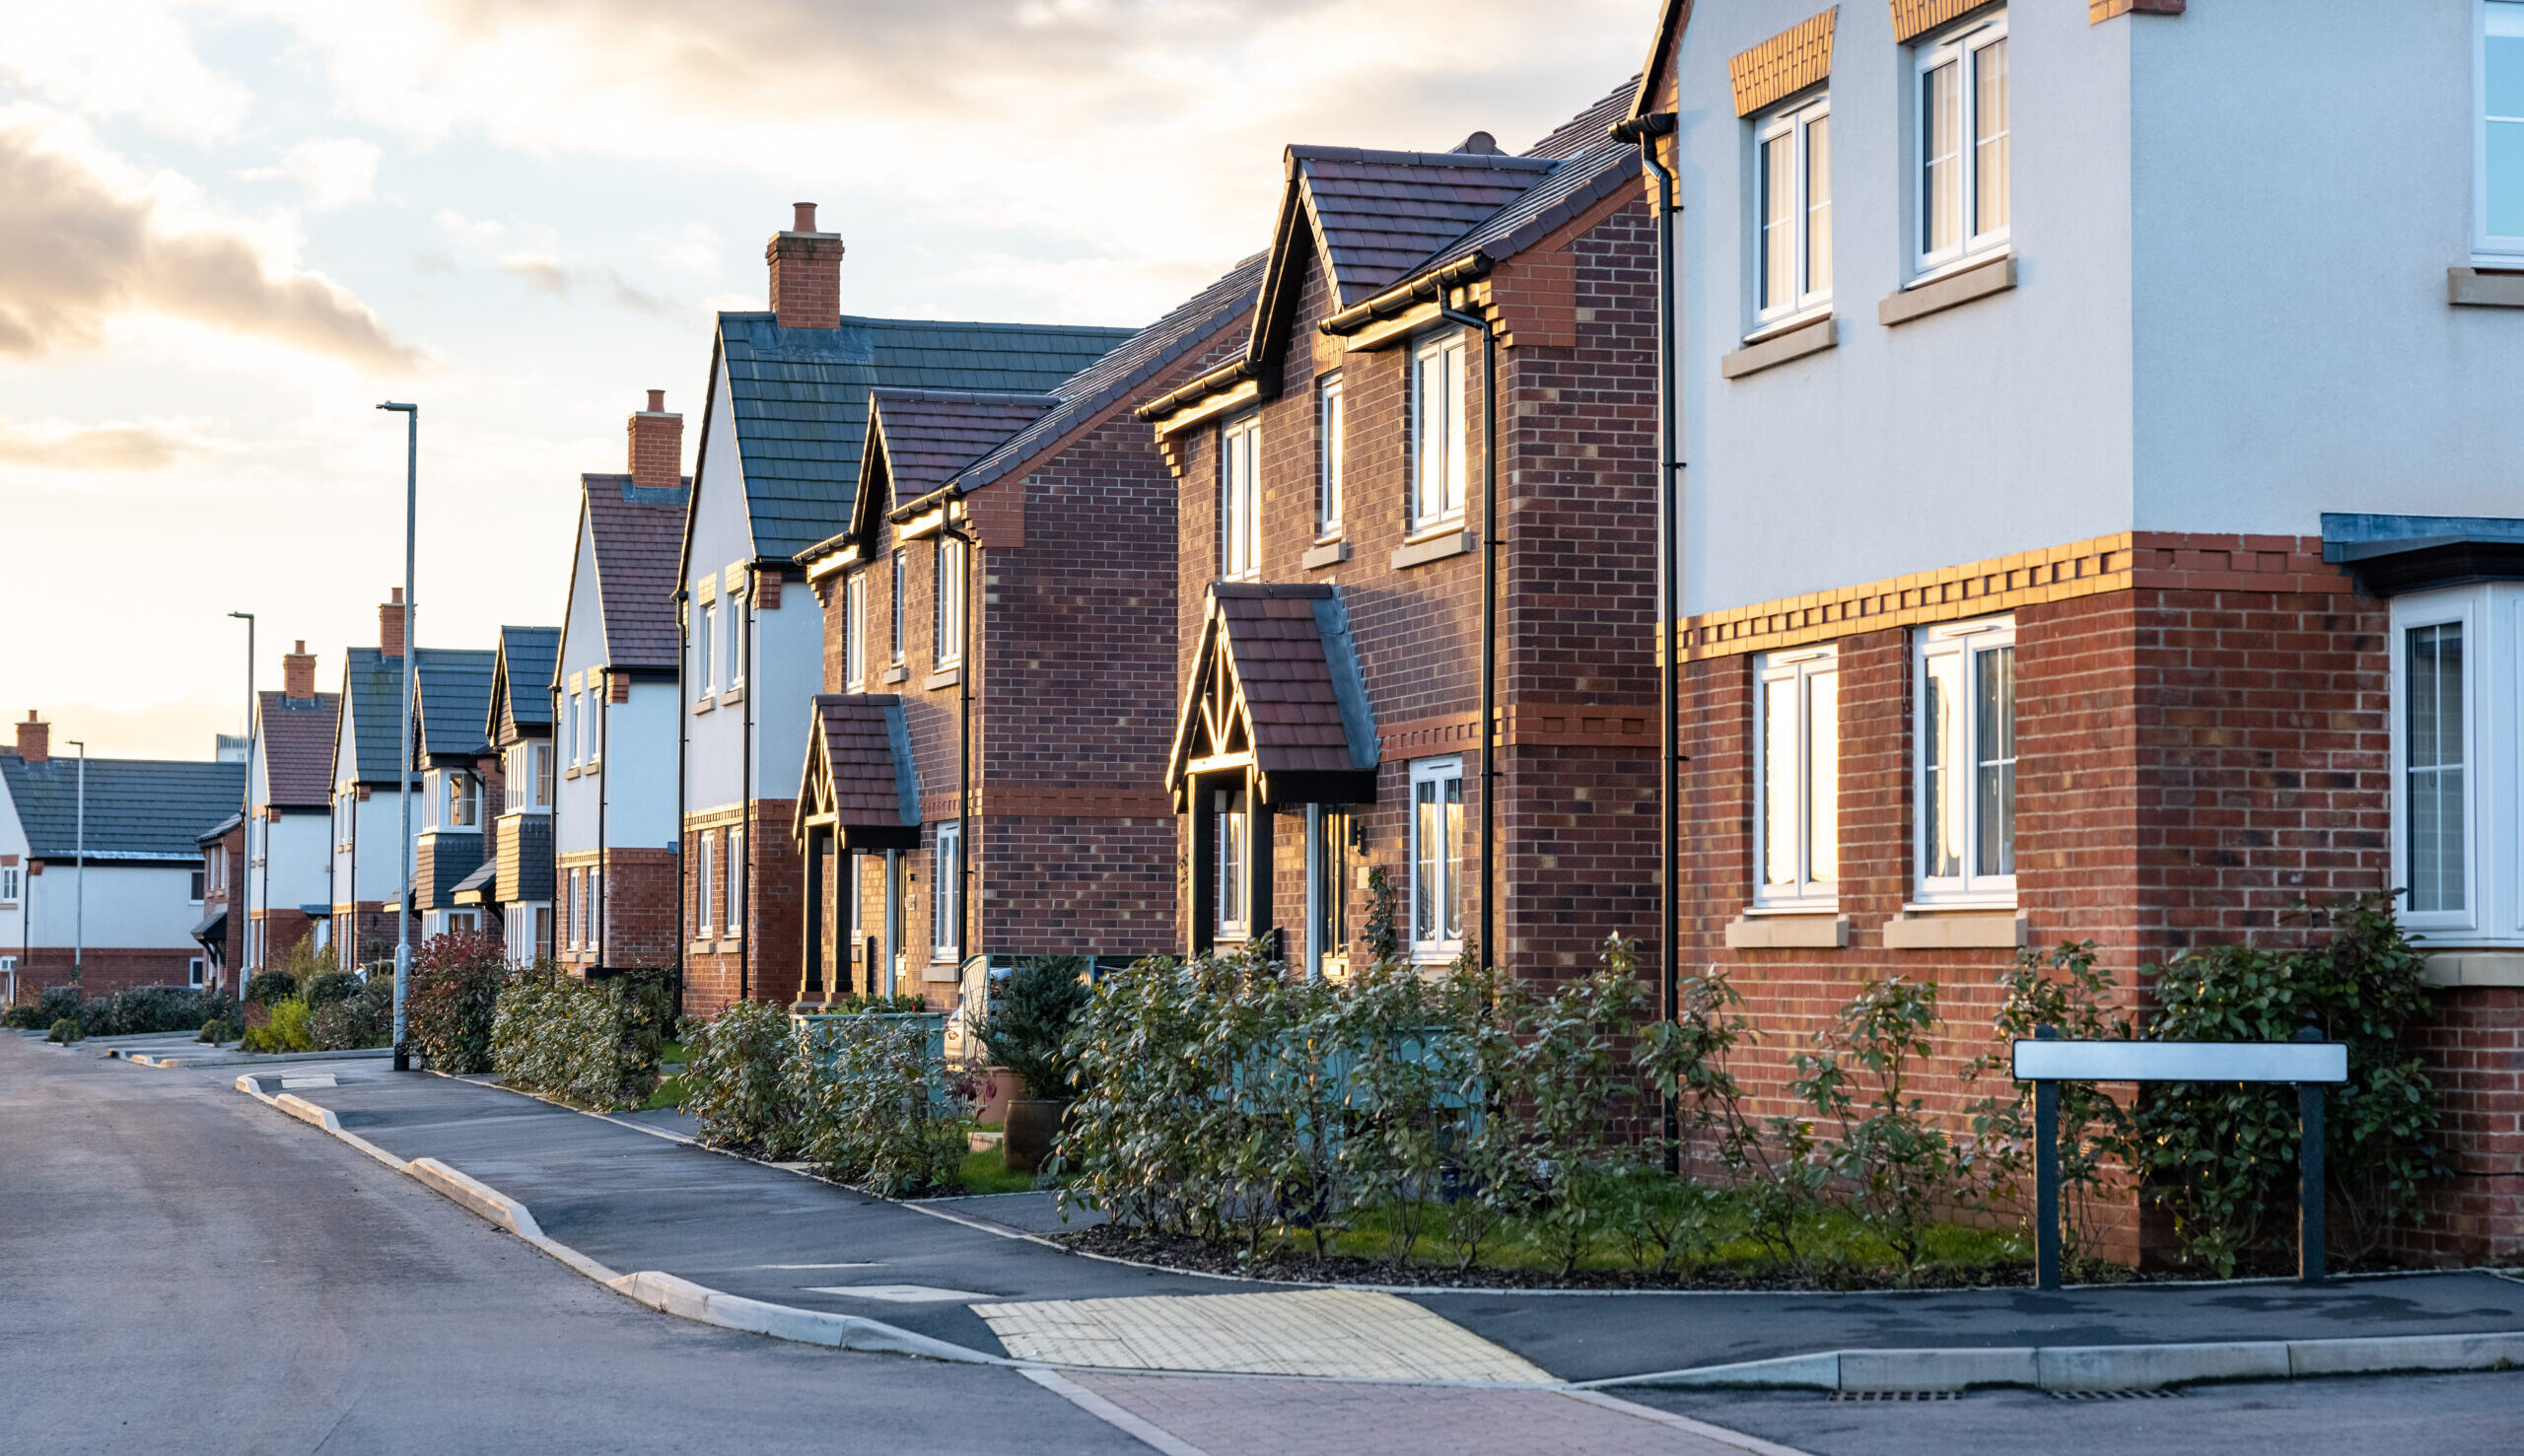 Rental reality… Belvoir advises on how the market is performing across the country - https://roomslocal.co.uk/blog/rental-reality-belvoir-advises-on-how-the-market-is-performing-across-the-country #reality #belvoir #advises #market #performing